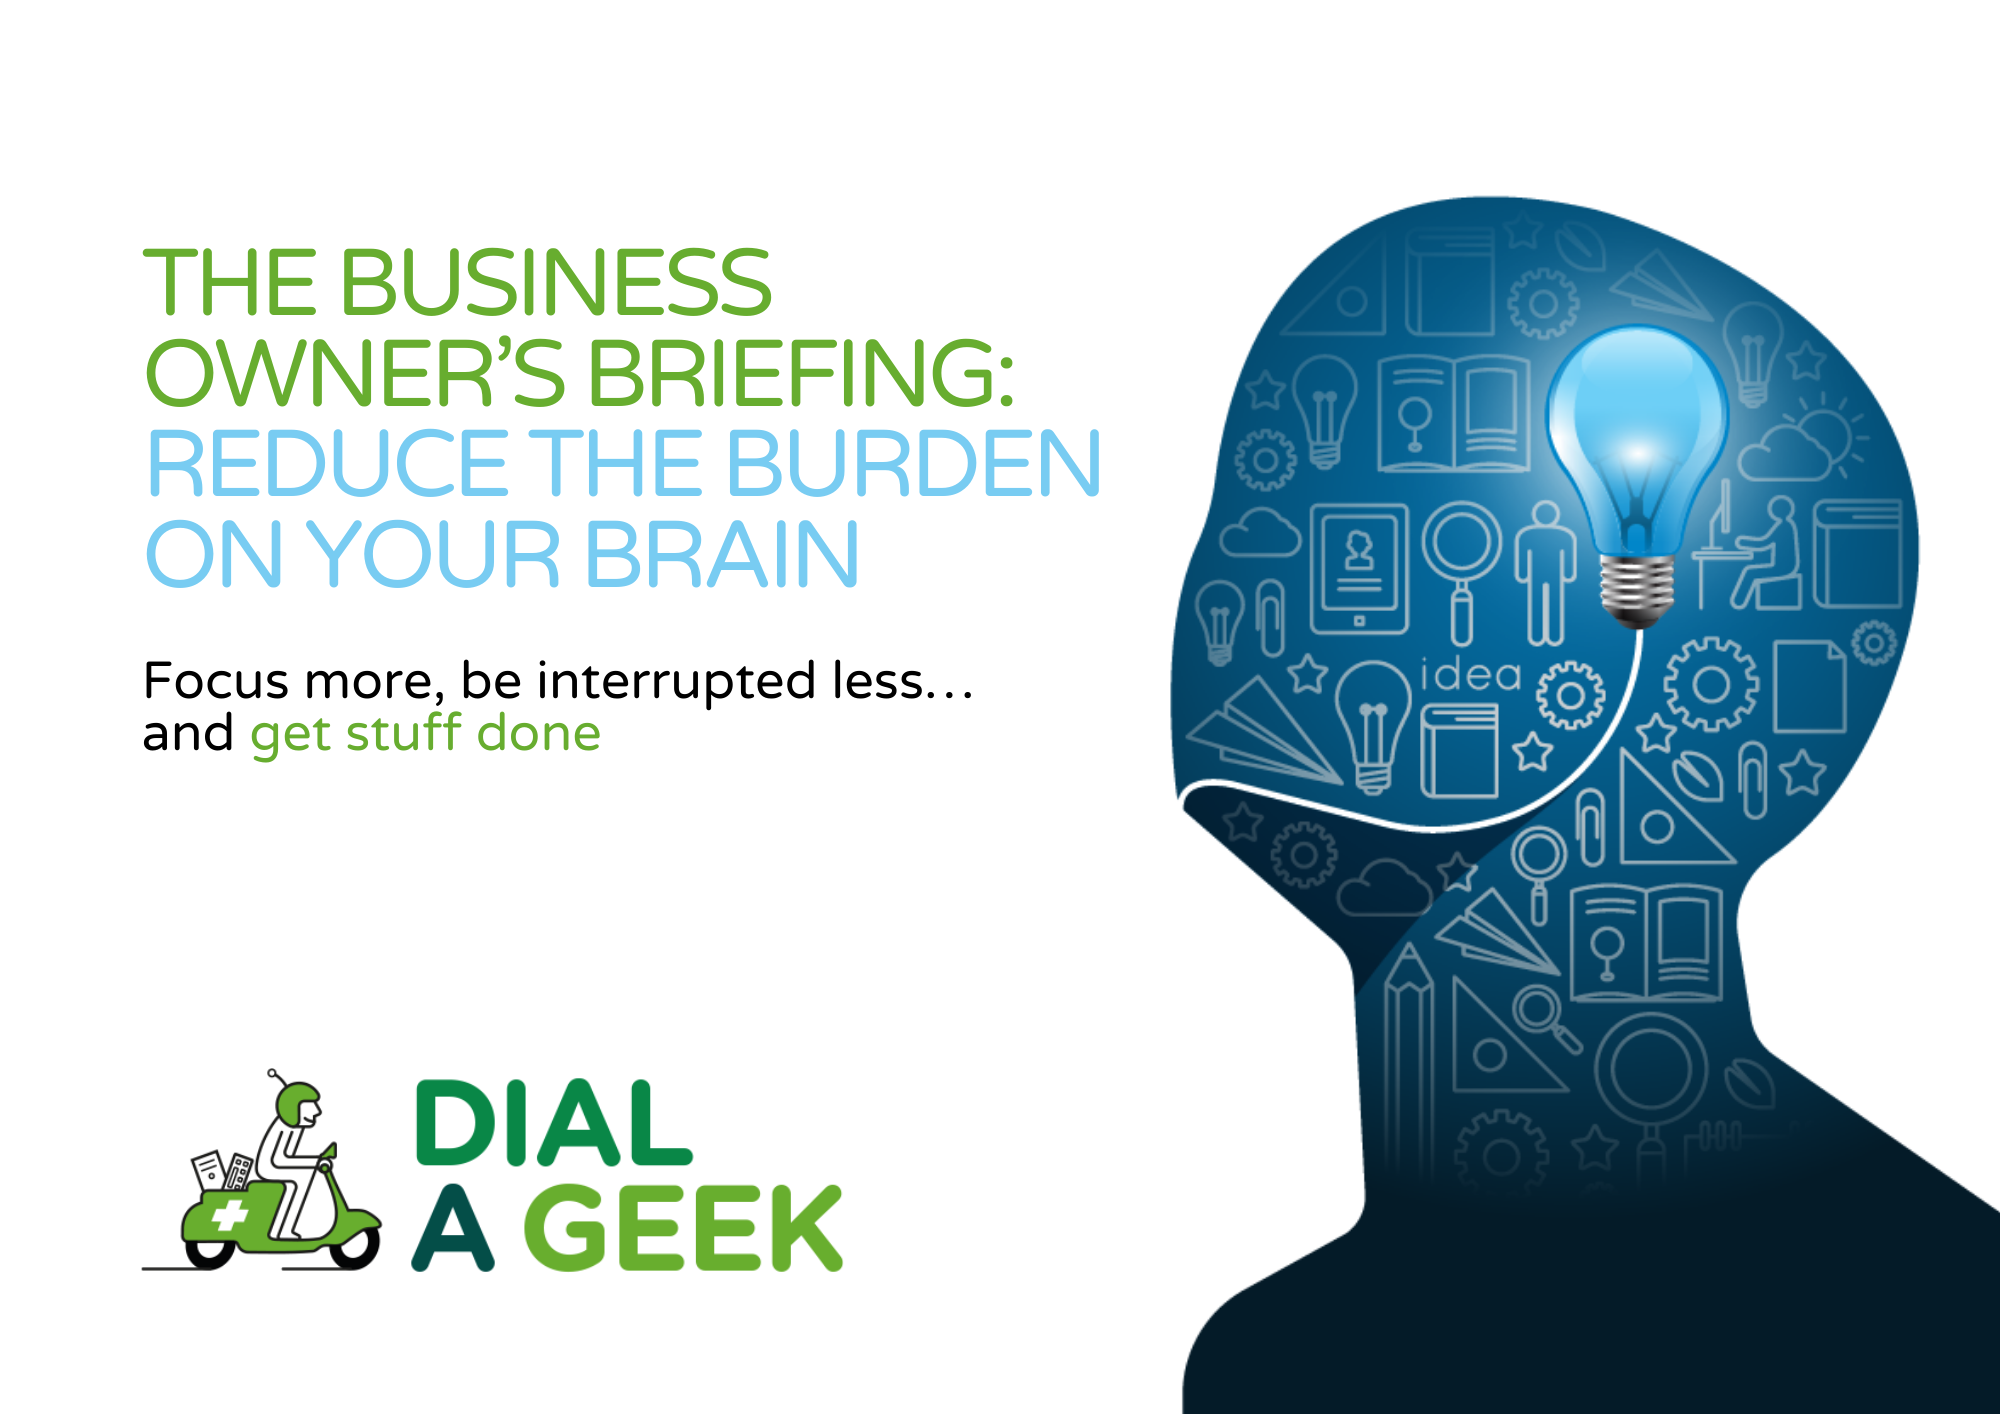 For business owners: reduce the burden on your brain